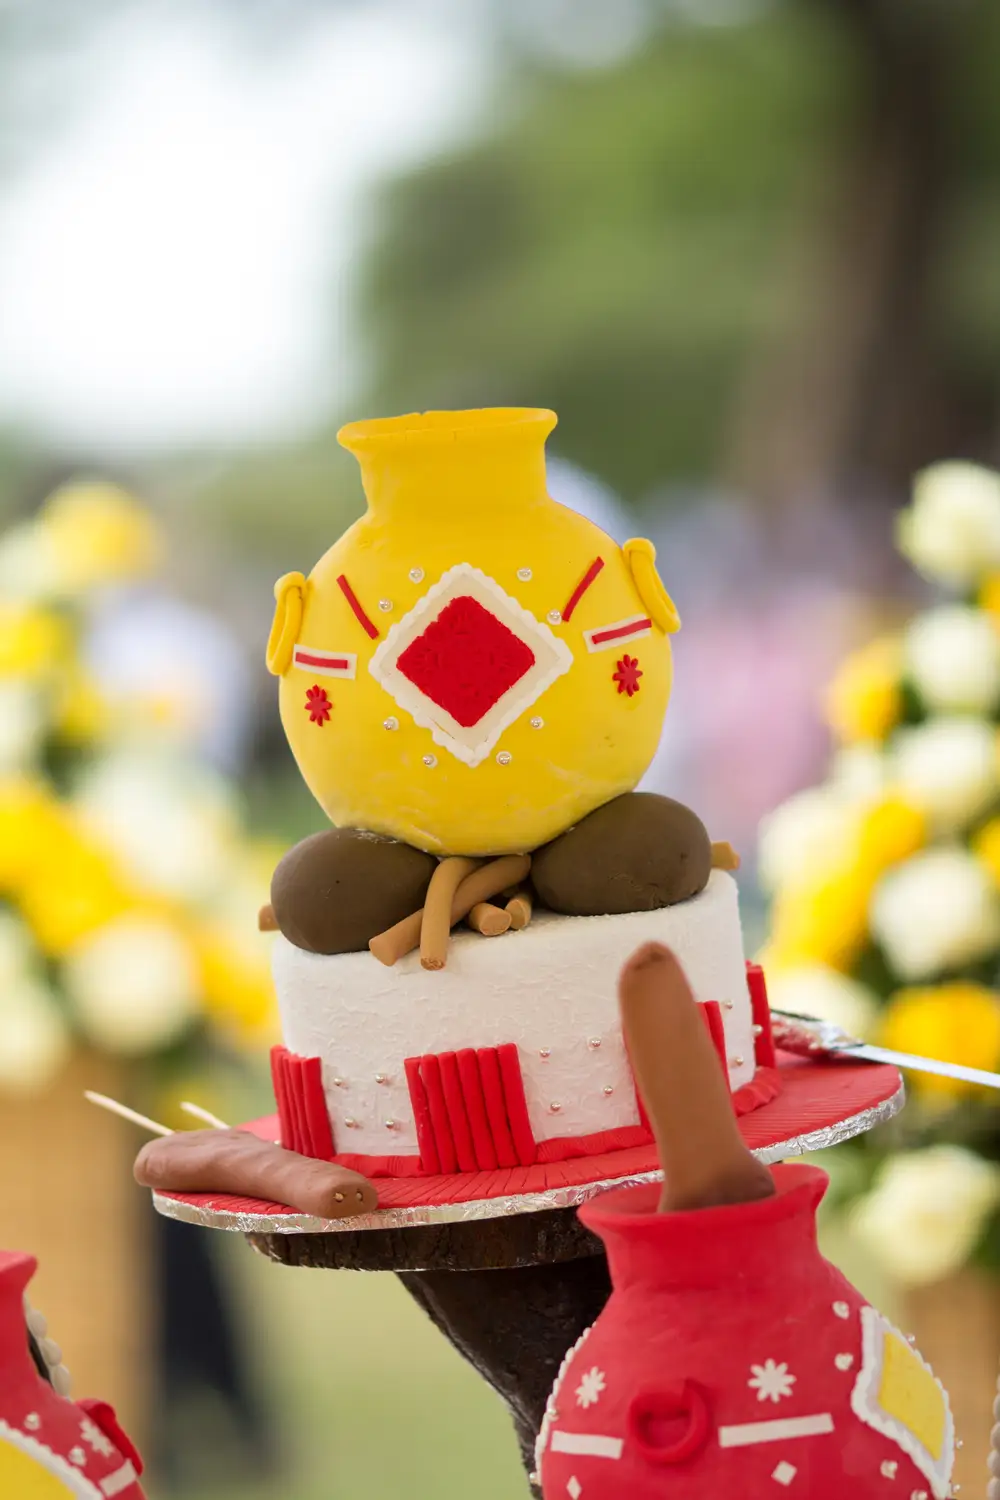 Cakes for a Traditional Ceremony